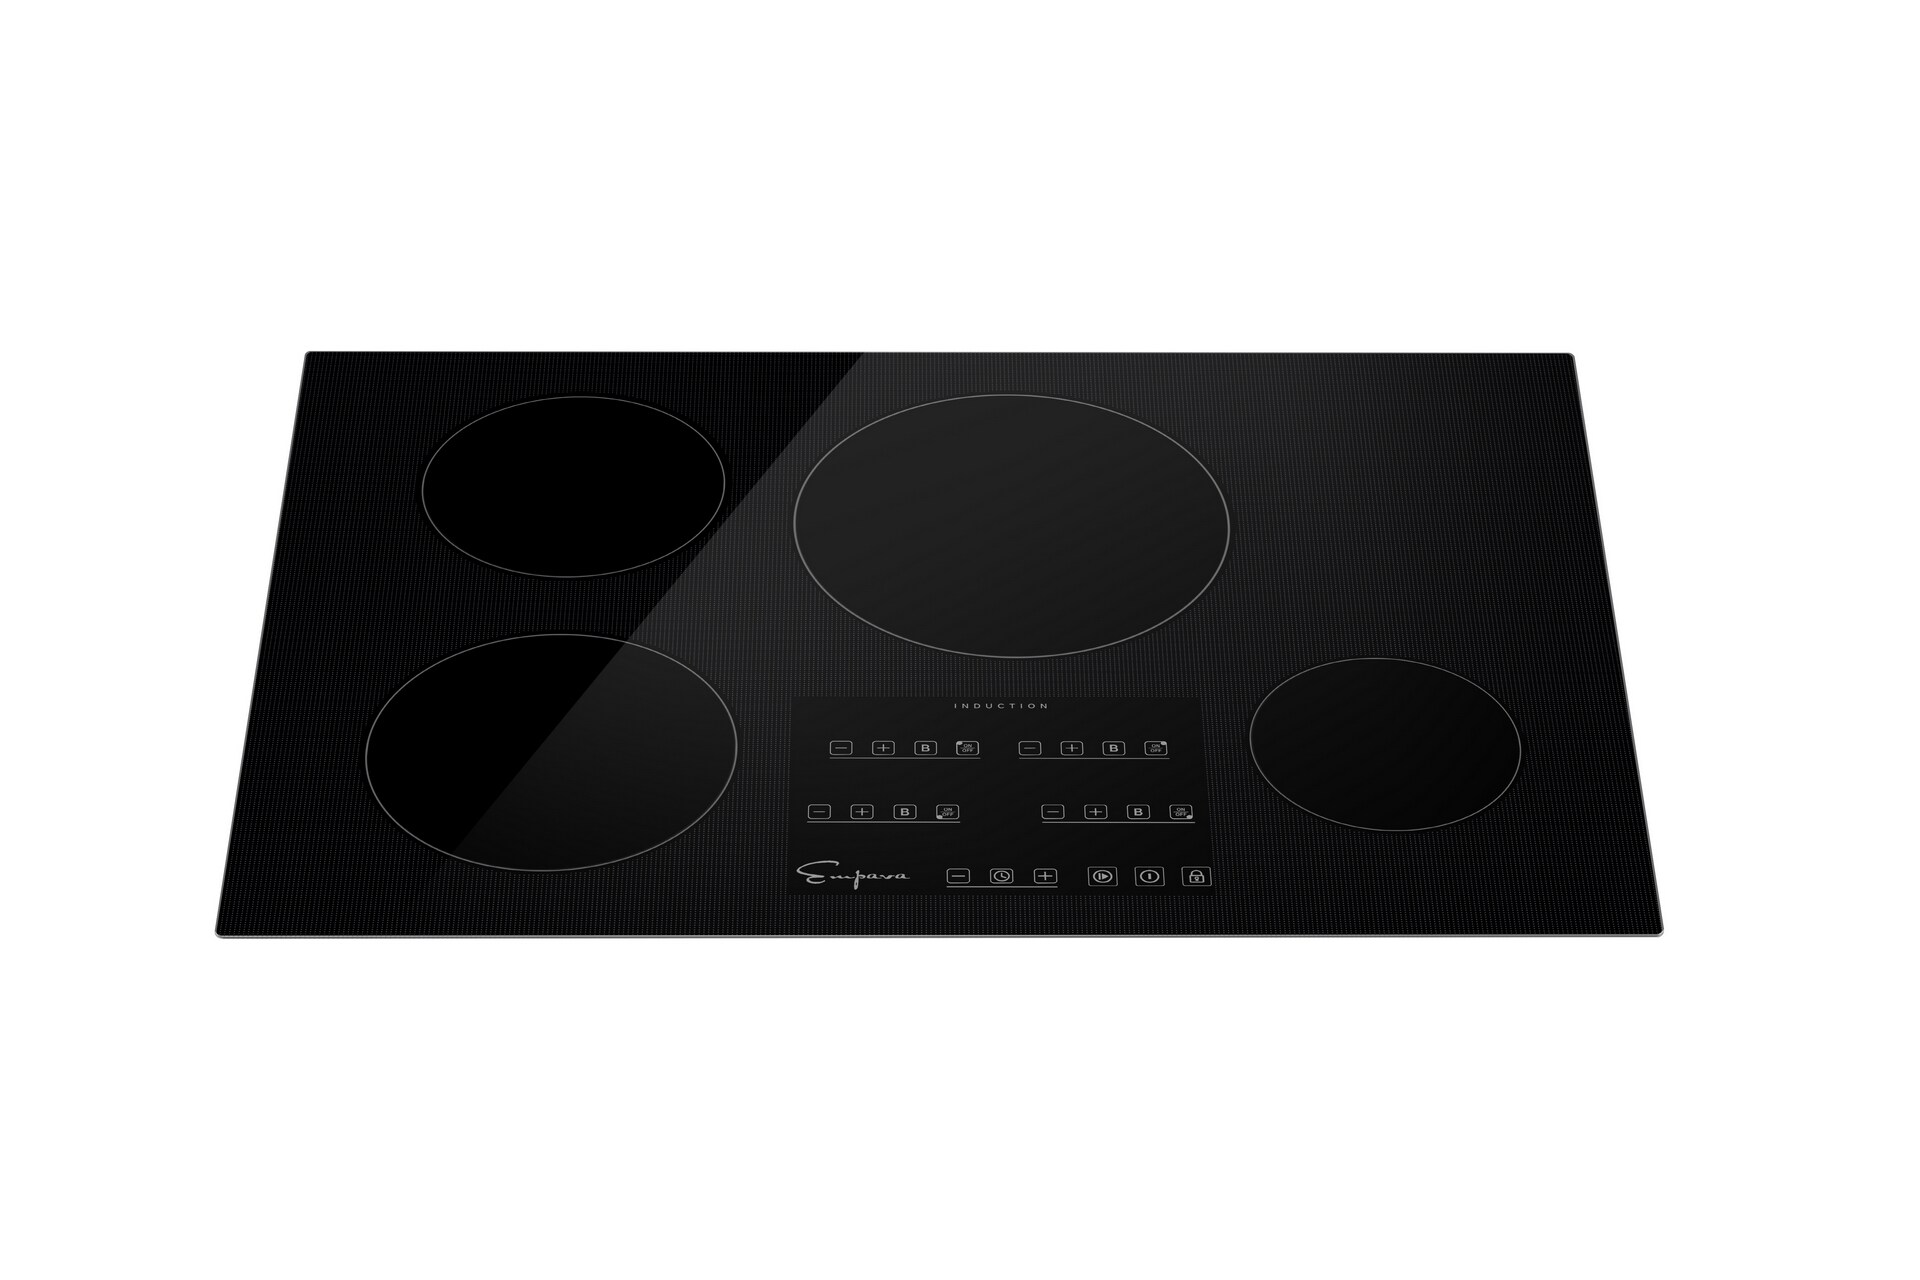 6 Reasons Why You Should Upgrade to an Induction Cooktop